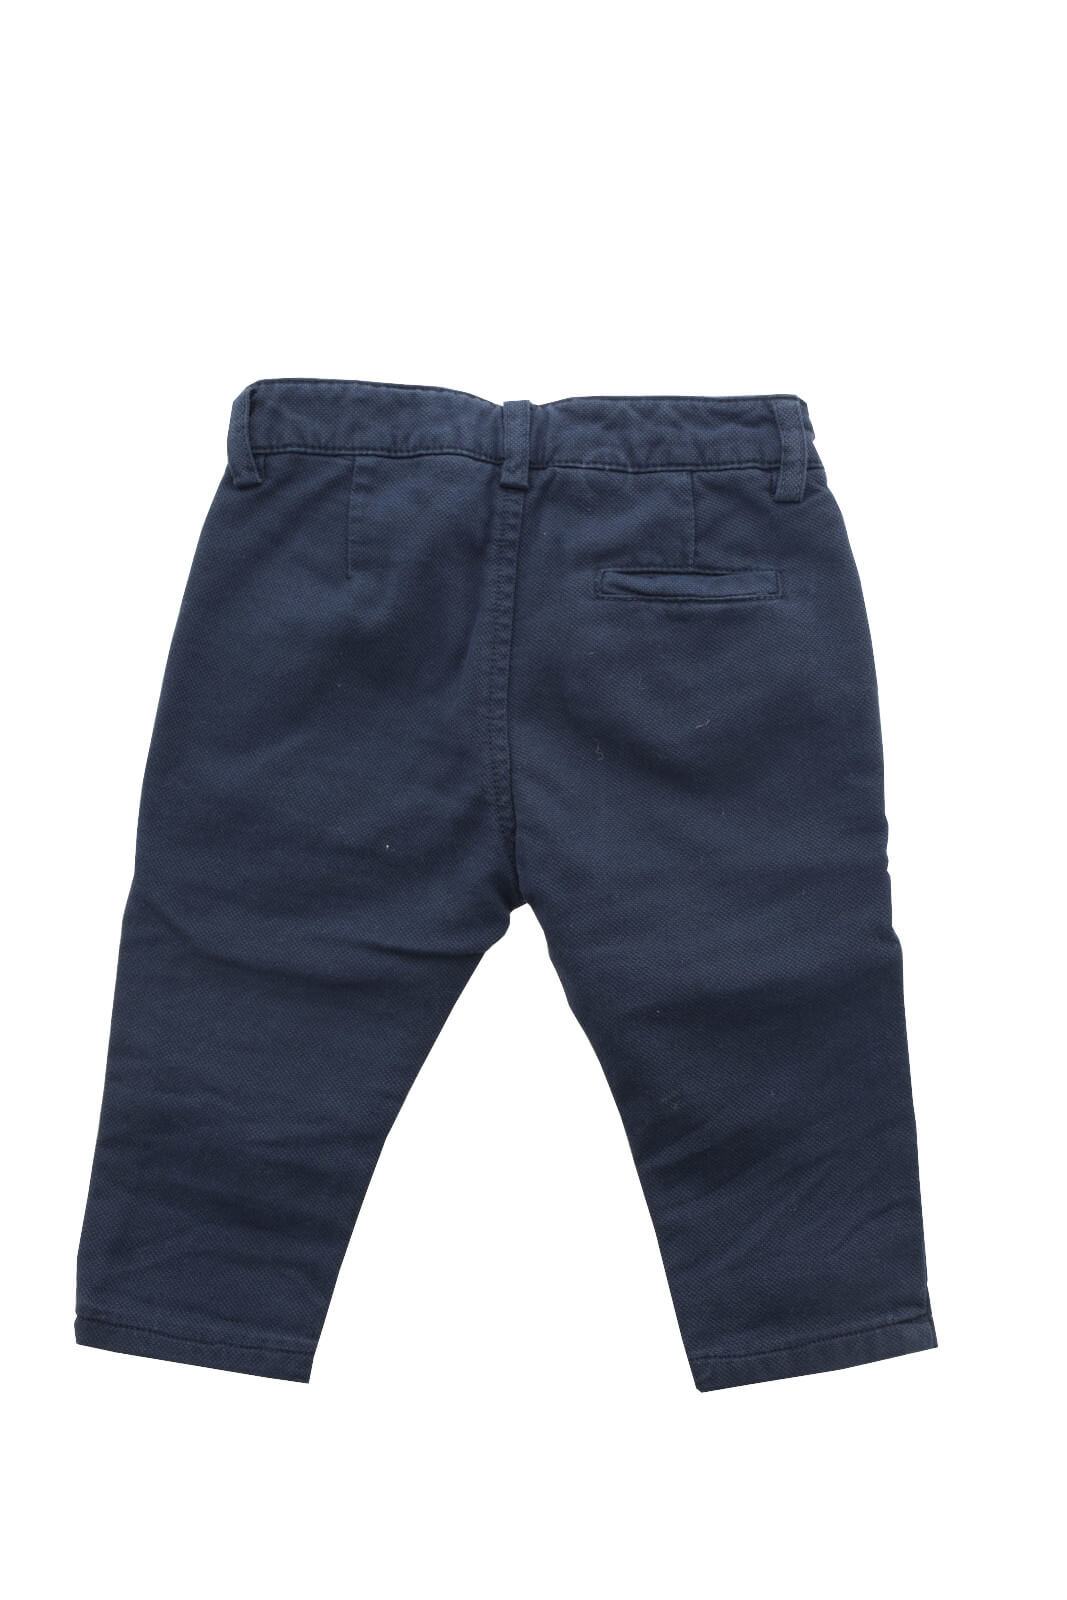 Daniele Alessandrini Children's trousers with zip and button closure